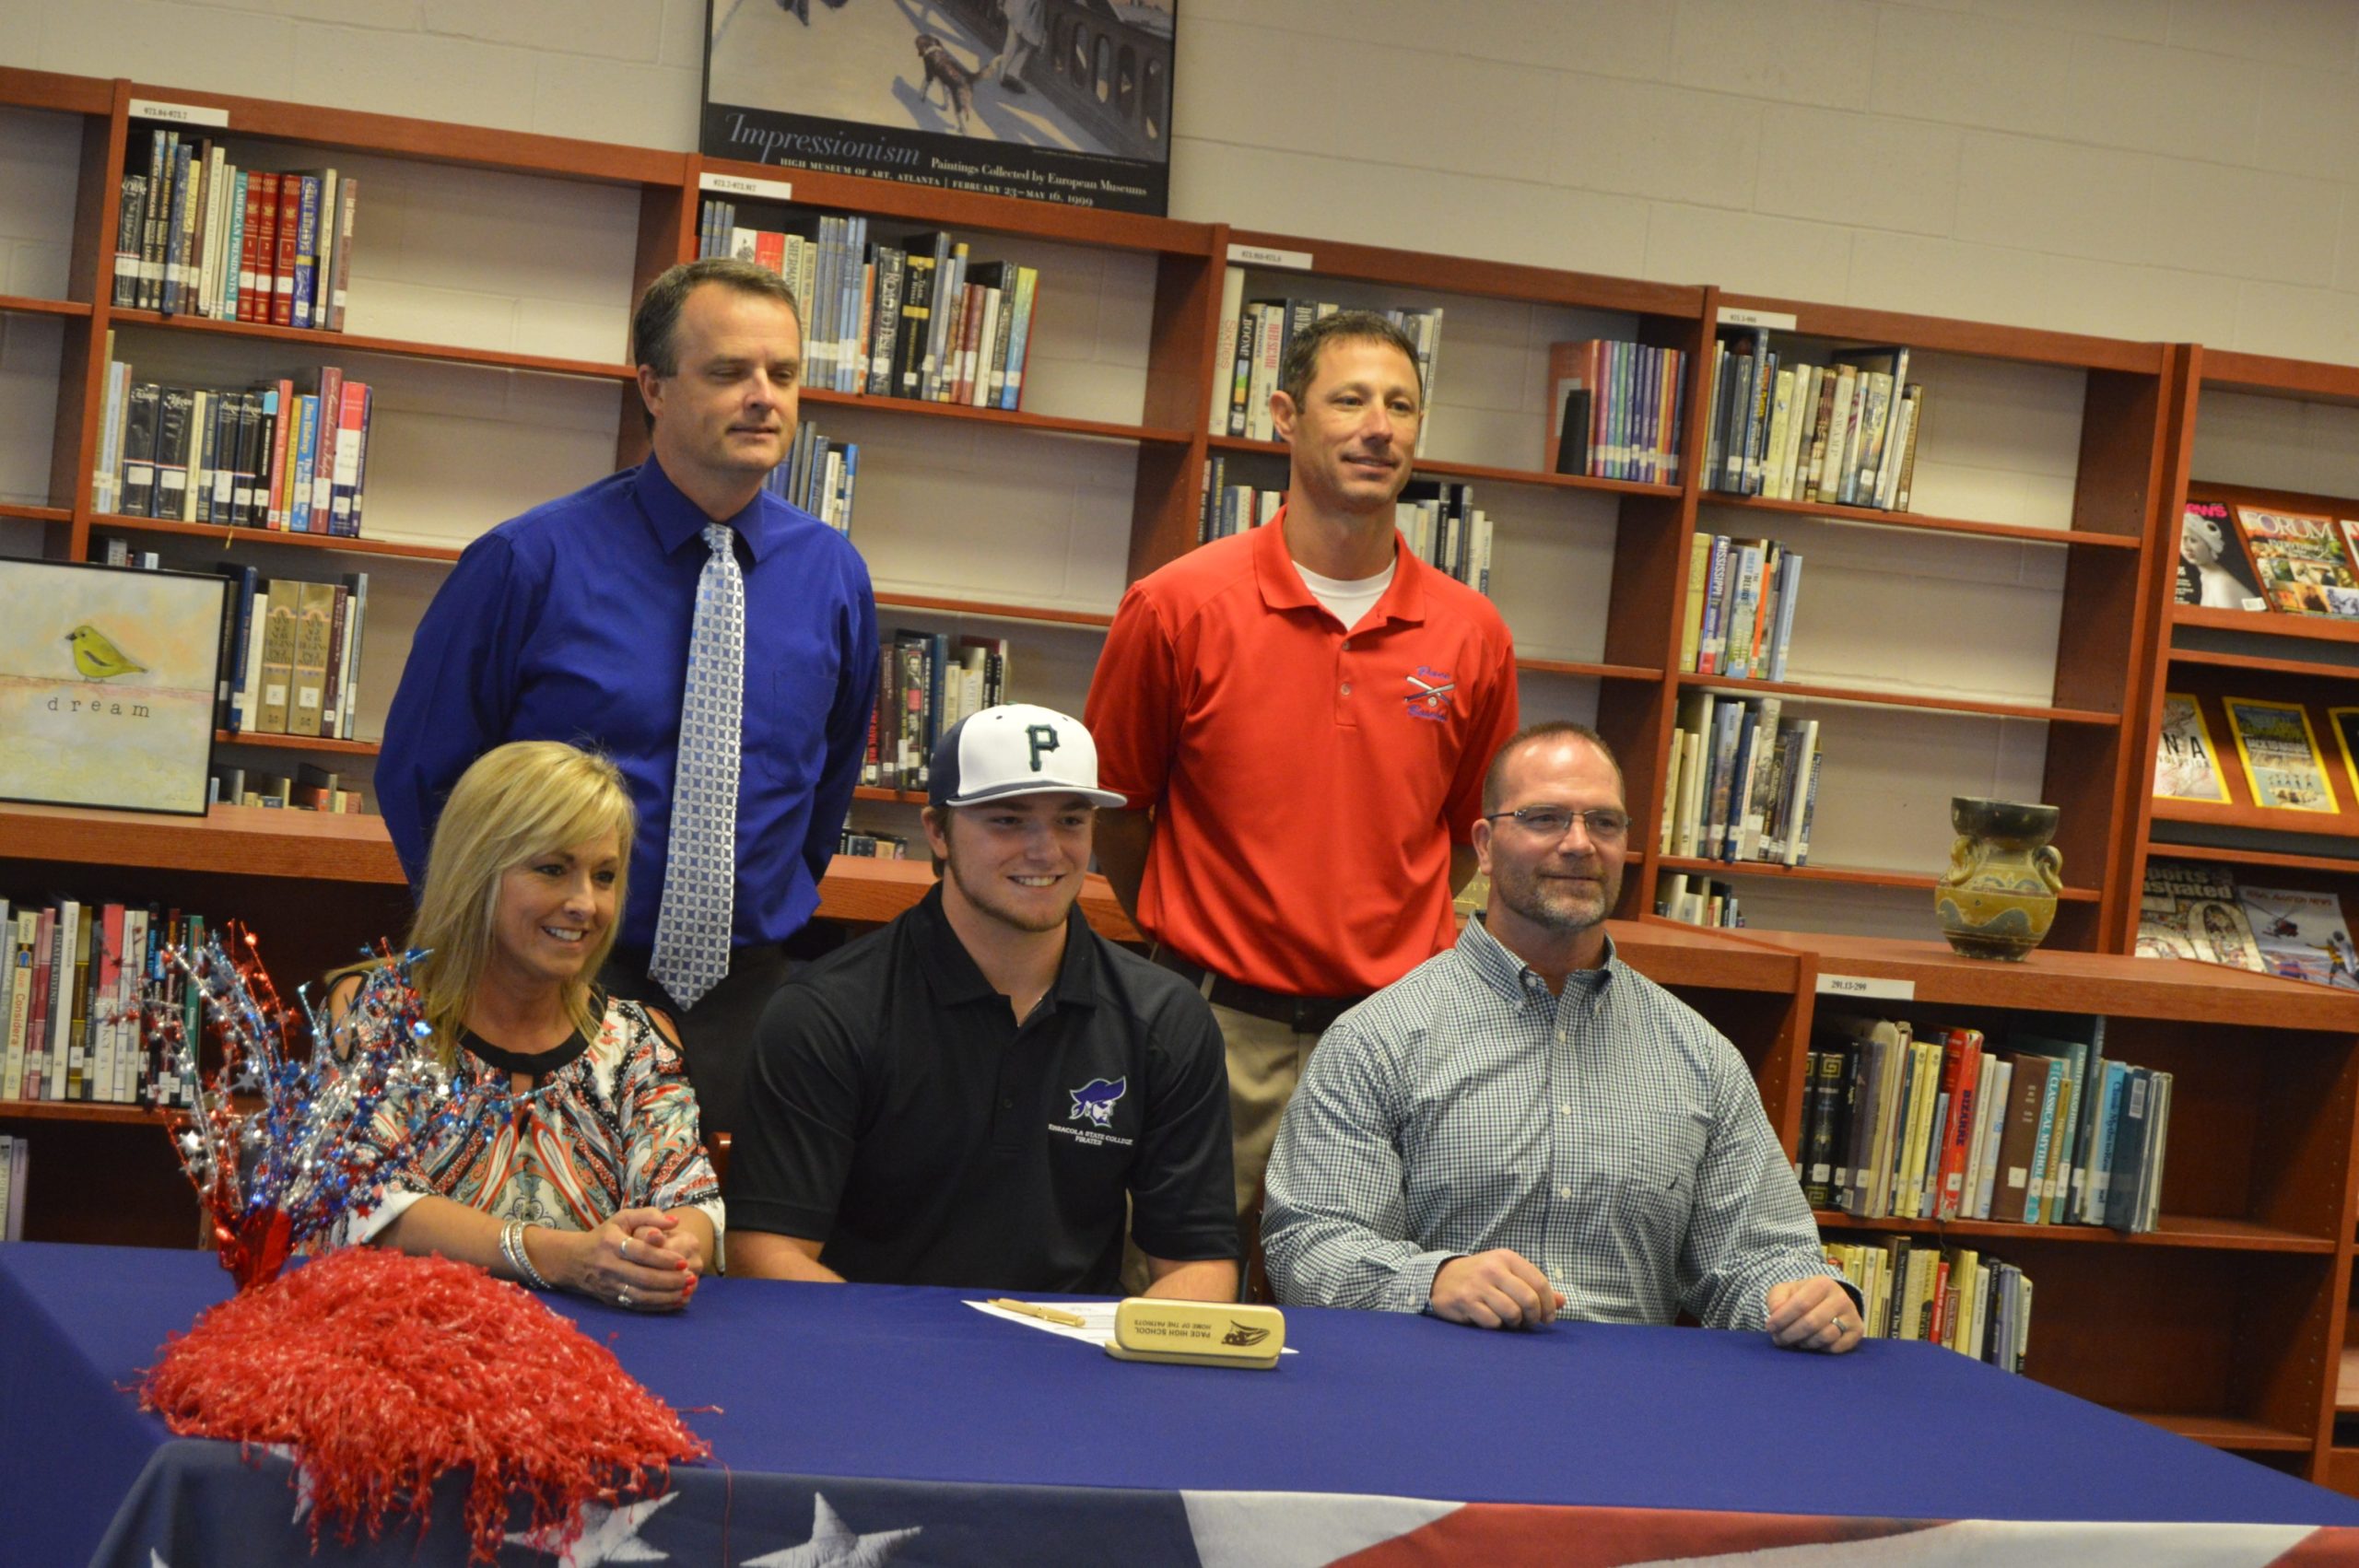 Jake Nemith, center, of Pace High School celebrates signing a baseball scholarship with Pensacola State College on Wednesday. Nemith is joined by his parents, Gina Nemith-Berklow, left, and Chris Nemith, right. Standing behind the family are PHS Principal Stephen Shell and PHS baseball coach Jason McBride. (MATT BROWN | Press Gazette)